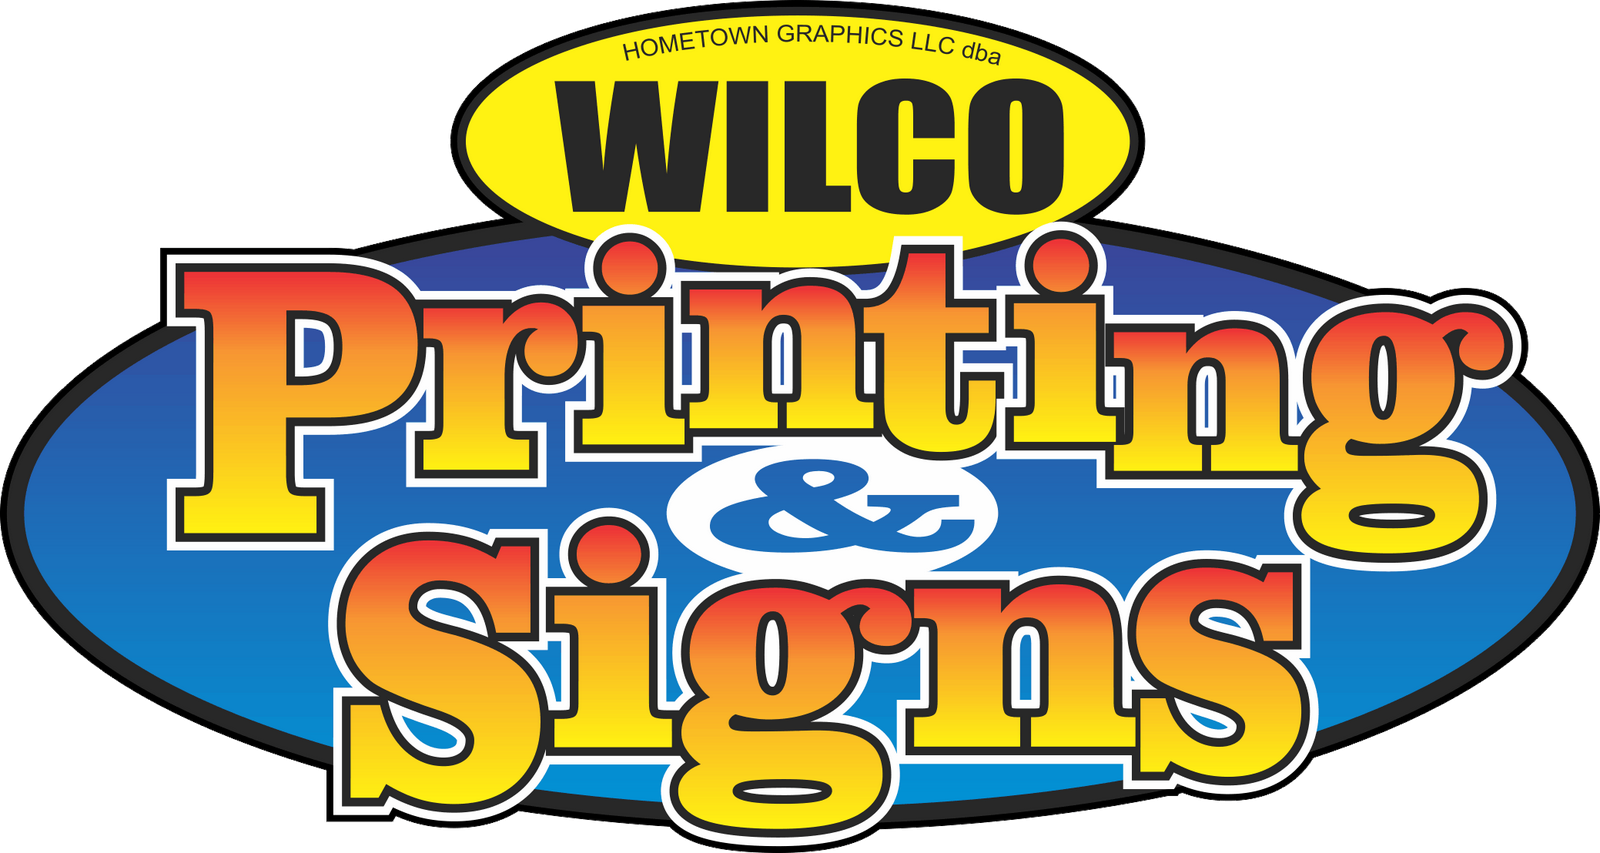 Wilco Printing &amp; Signs is a full service commercial printing and sign company located in Braselton , GA providing Graphic Design, Commercial Printing, Business Forms and Materials, Brochures, Postcards, Programs, Menus, Wide Format Printing, Architectural Drawings and Plans, Interior,  Exterior Signs, Sign Systems, Directional Signs, Facility Signs, Banners, Feather Flags, Retractable Banners, Outdoor Banners, Real Estate Signs, Yard Signs, Vehicle Graphics, Fleet Graphics, Vehicle Wraps, Door Decals,  Floor Decals, Vinyl Graphics, Labels, Stickers, Vinyl Decals, Window Graphics, Hand Painted Window Splashes, Car Tags, Custom Pallet Signs, Apparel, Embroidery, Screen Printing, Heat Press, Athletic, Cheerleading Uniforms, Sublimated Tablecloths, HOPUP Straight Full Height Tension Fabric Display and Promotional Products for trade shows, events and marketing materials.